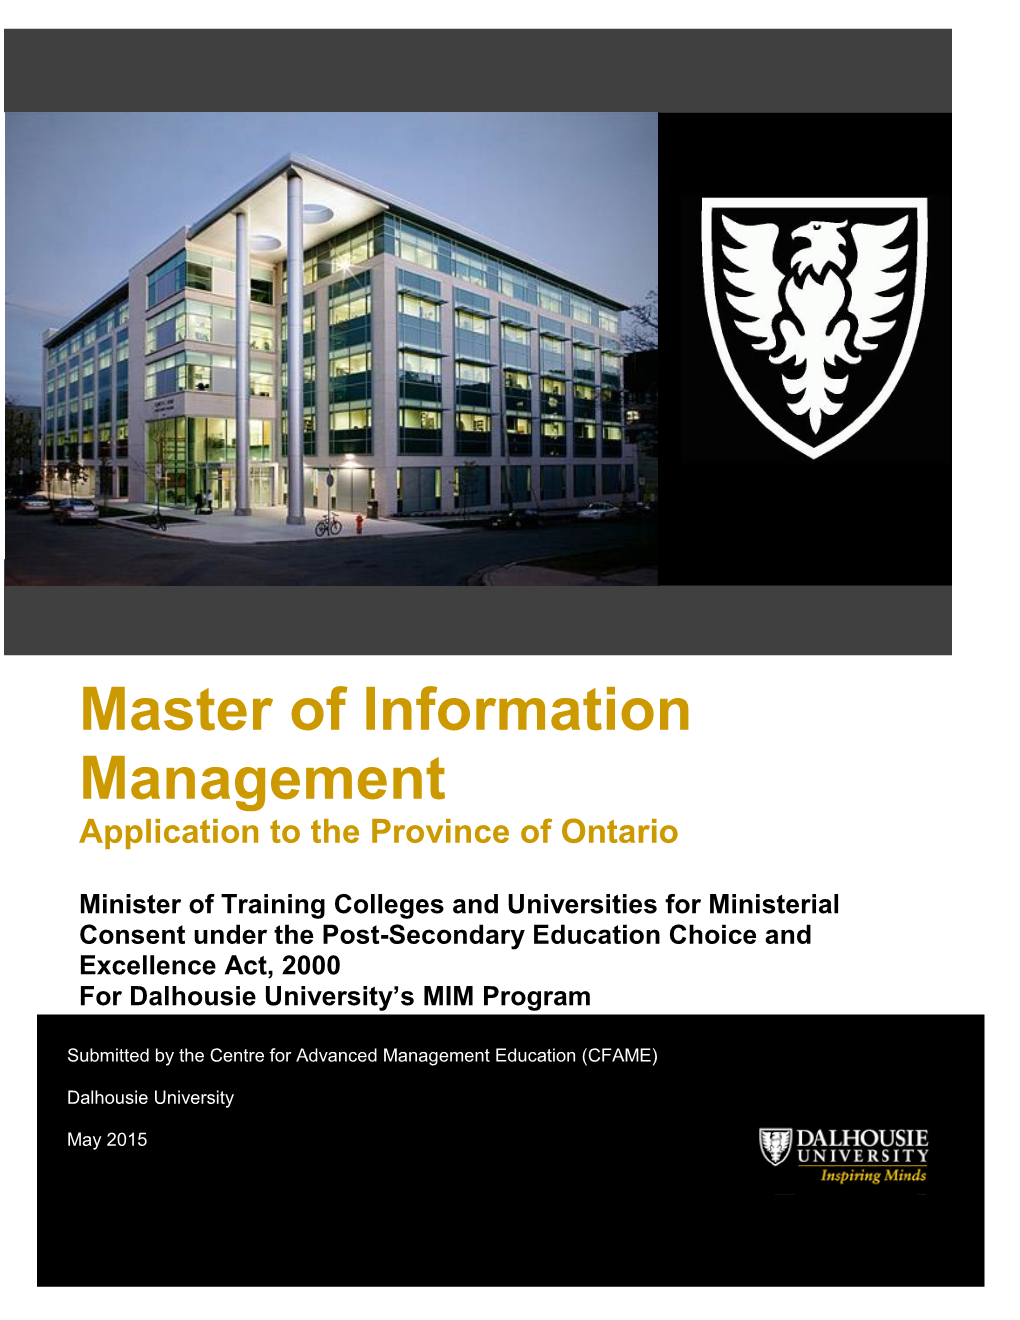 Master of Information Management Application to the Province of Ontario